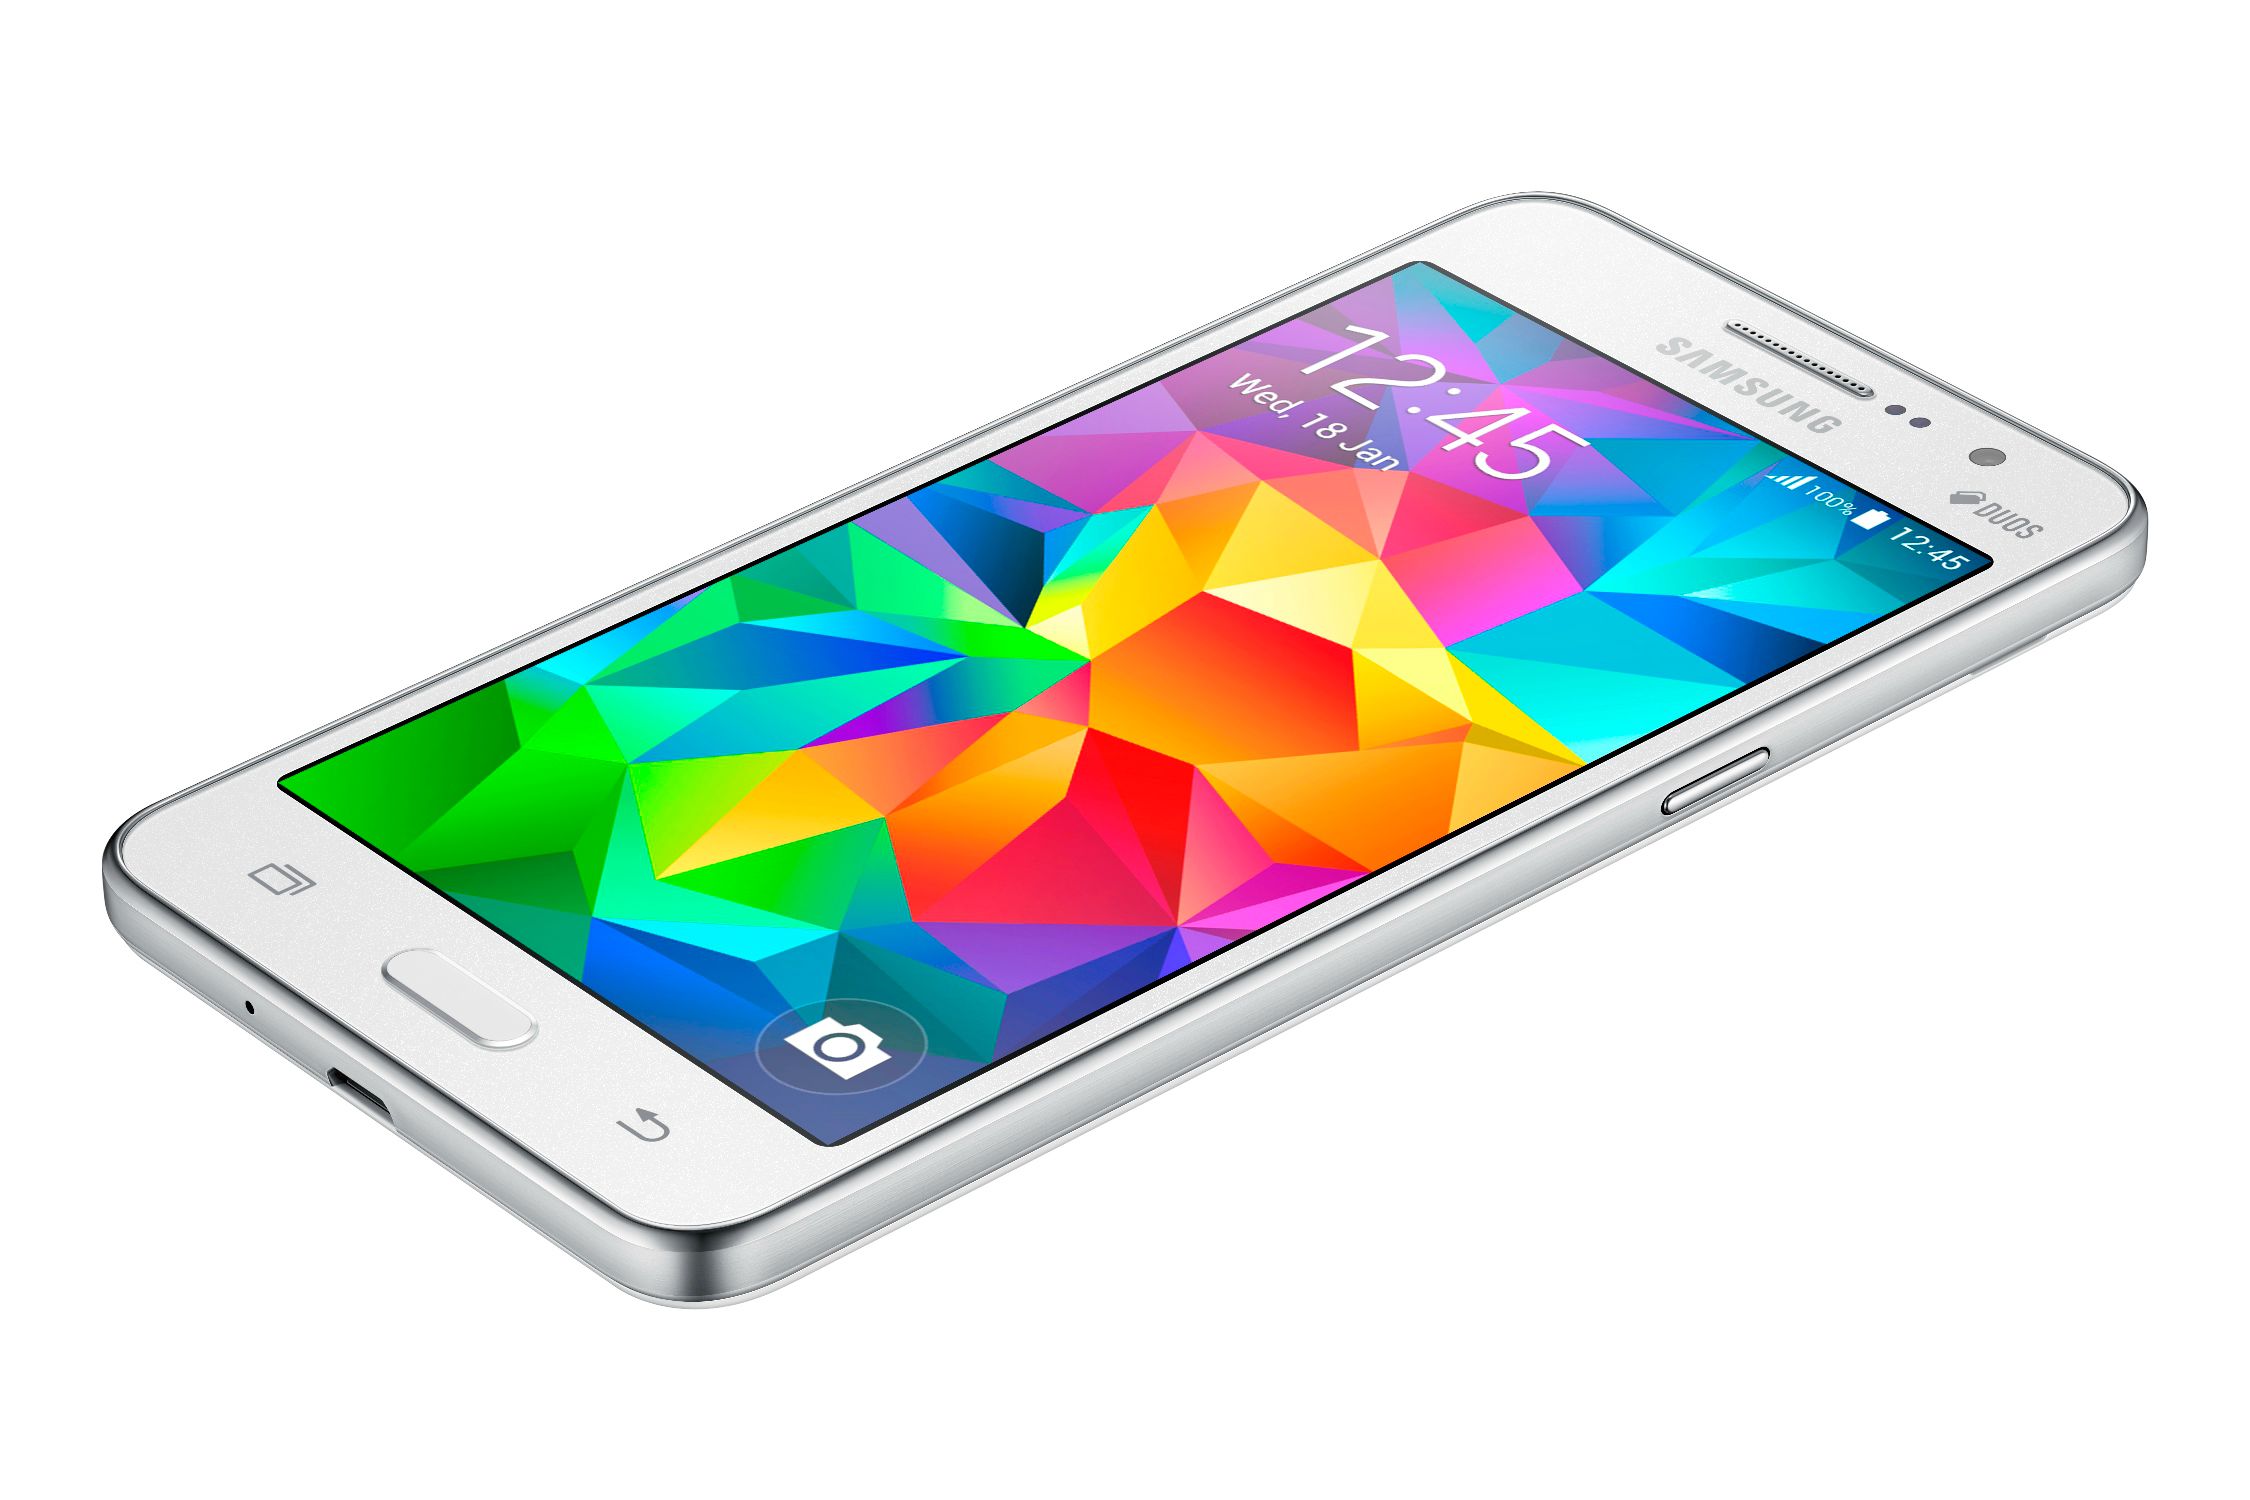 Samsung Galaxy Grand Prime 4G with 5-inch display launched in India for